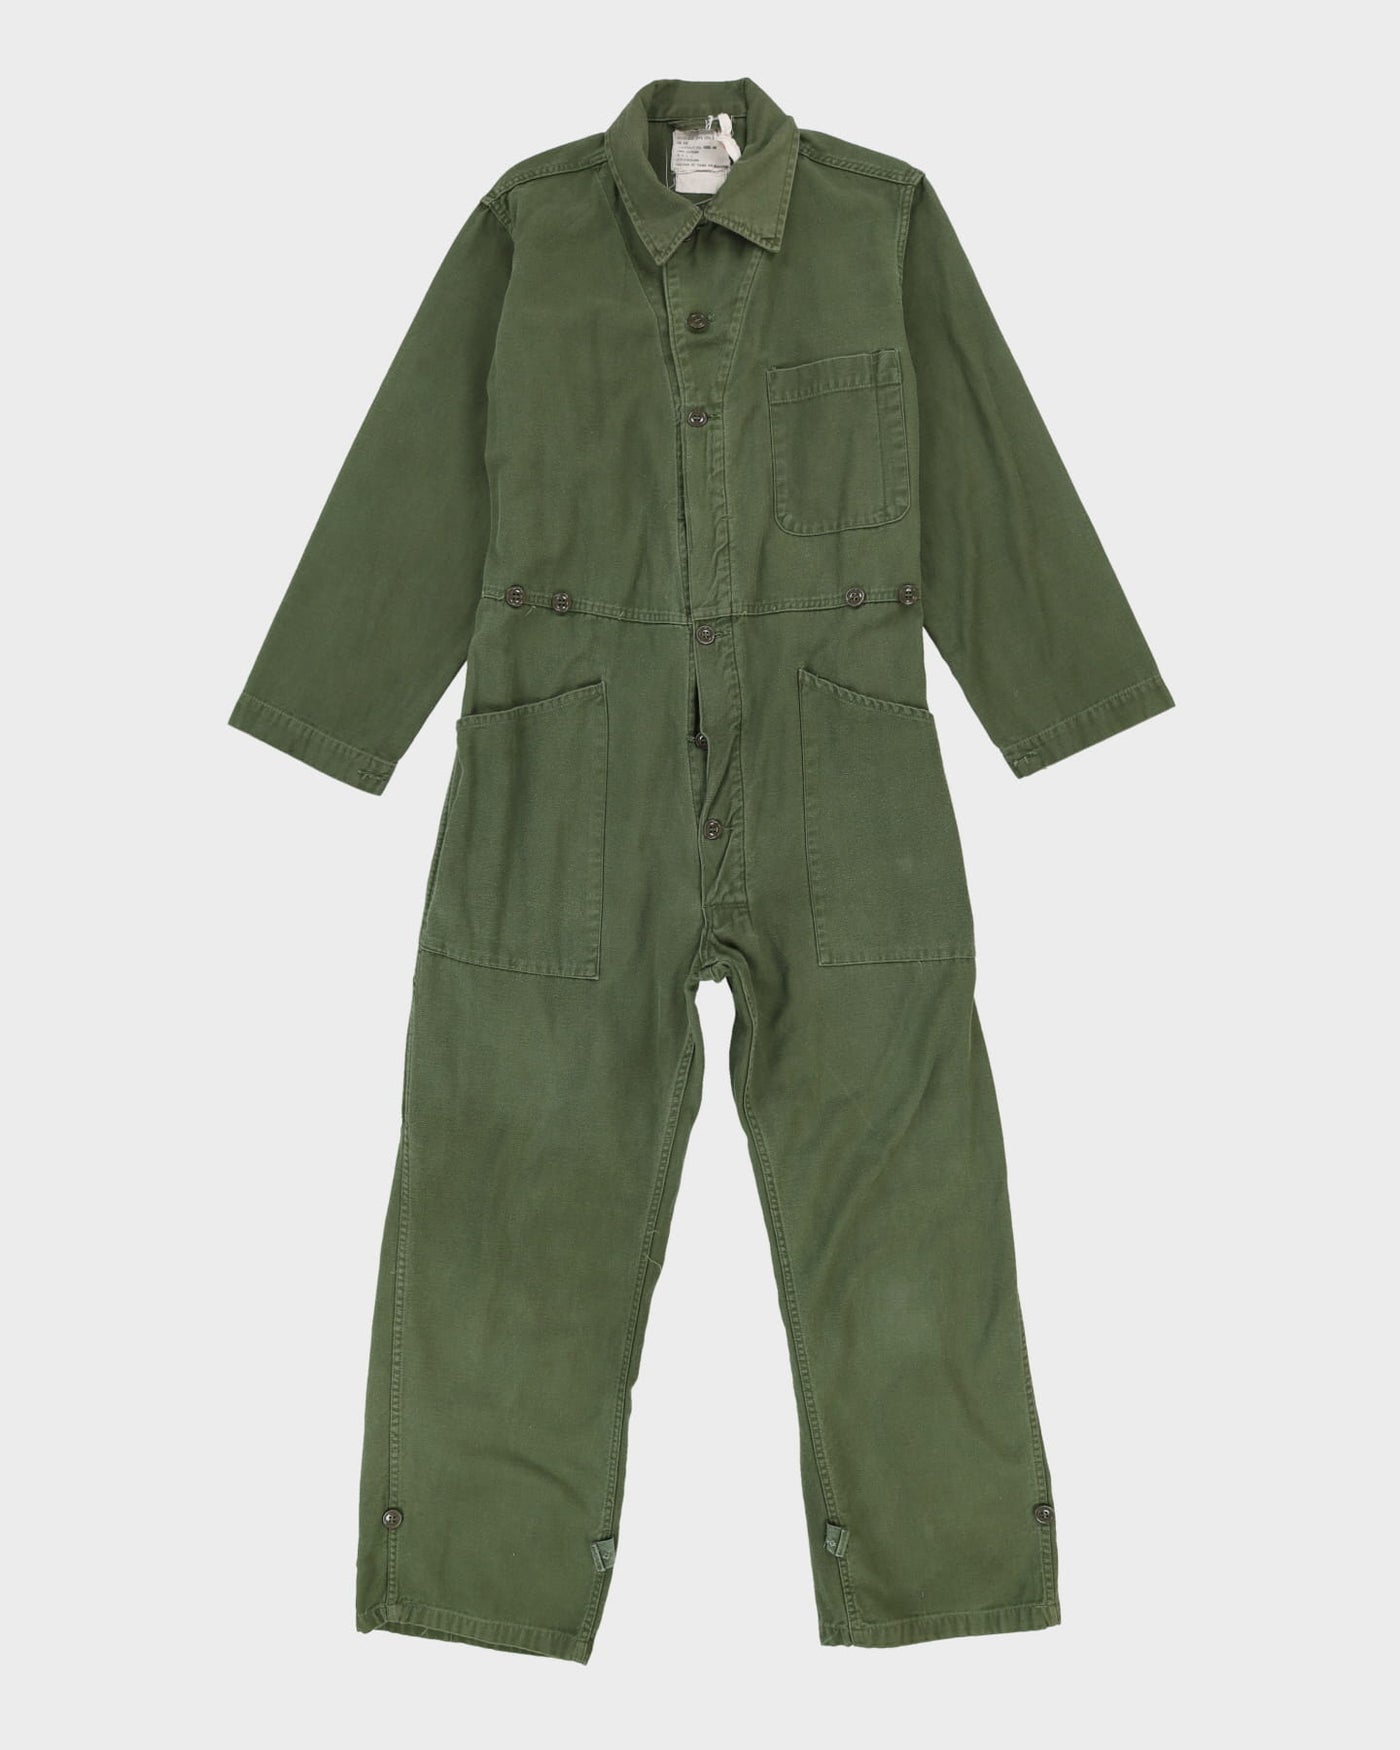 90s Vintage US Army Sateen Utility Coveralls - Small